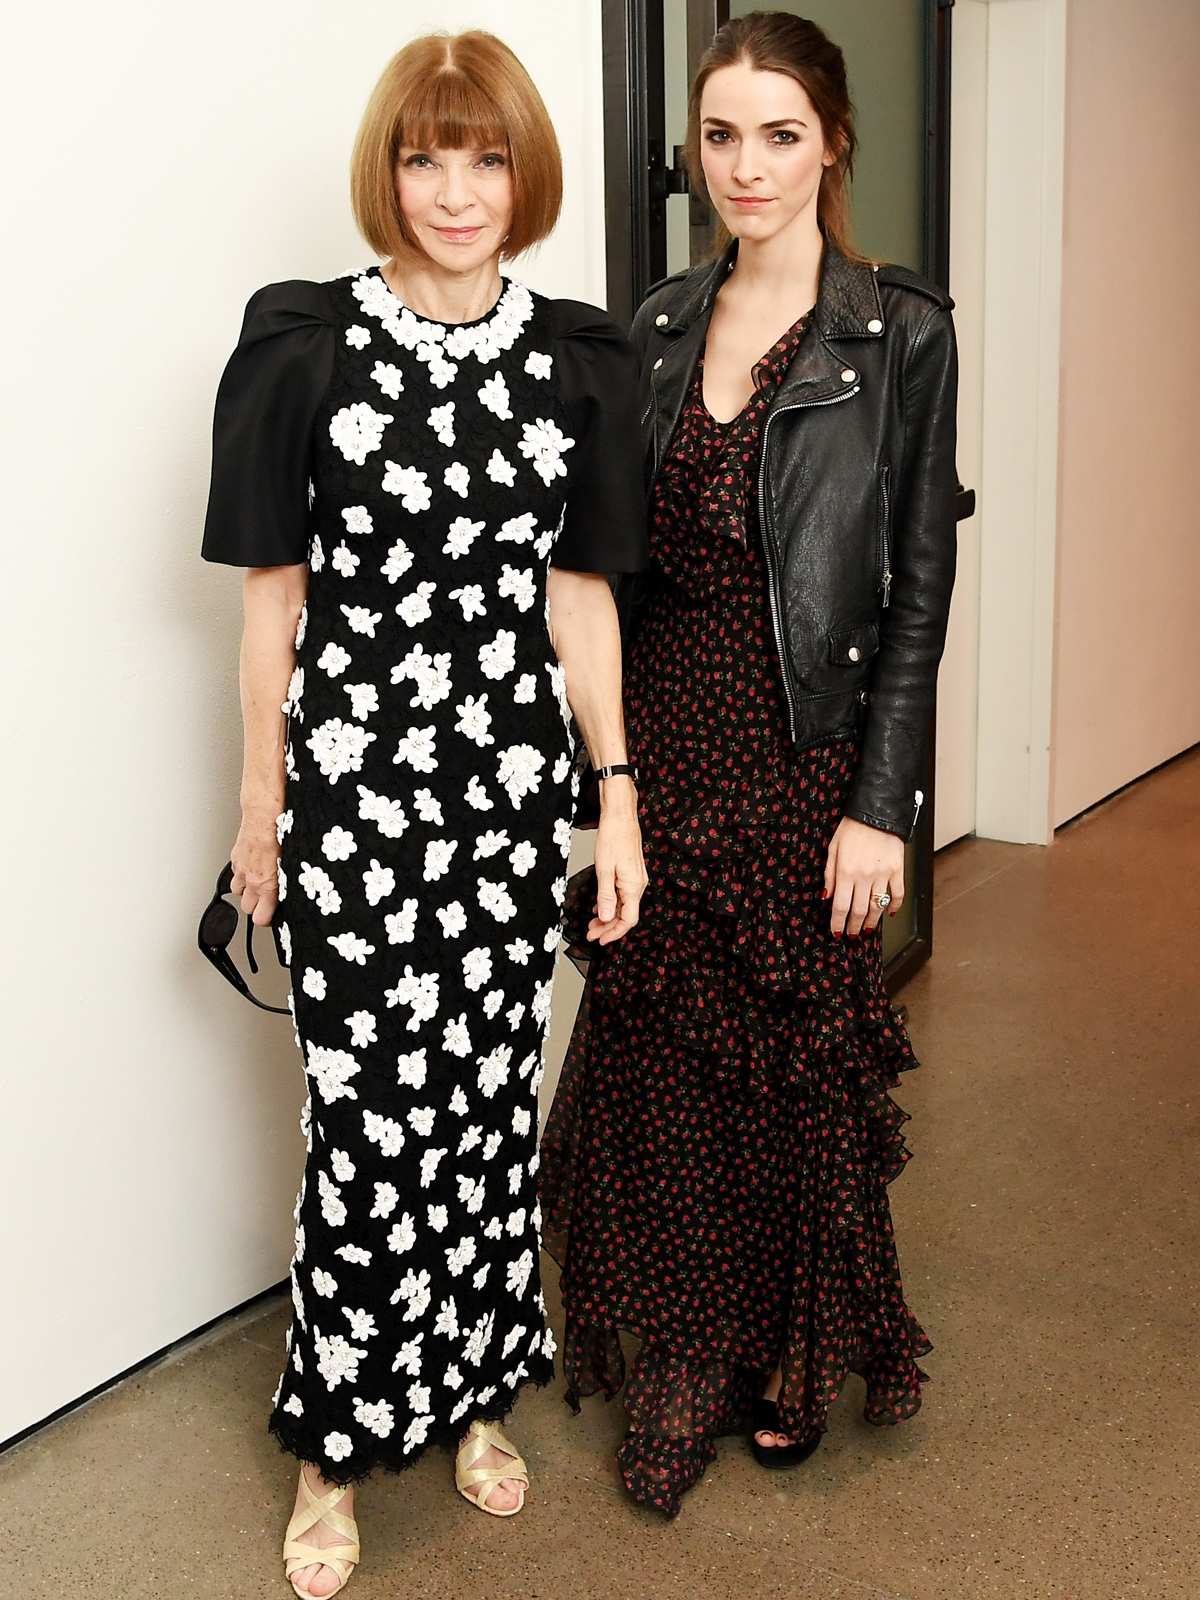 Anna Wintour and Bee Shaffer